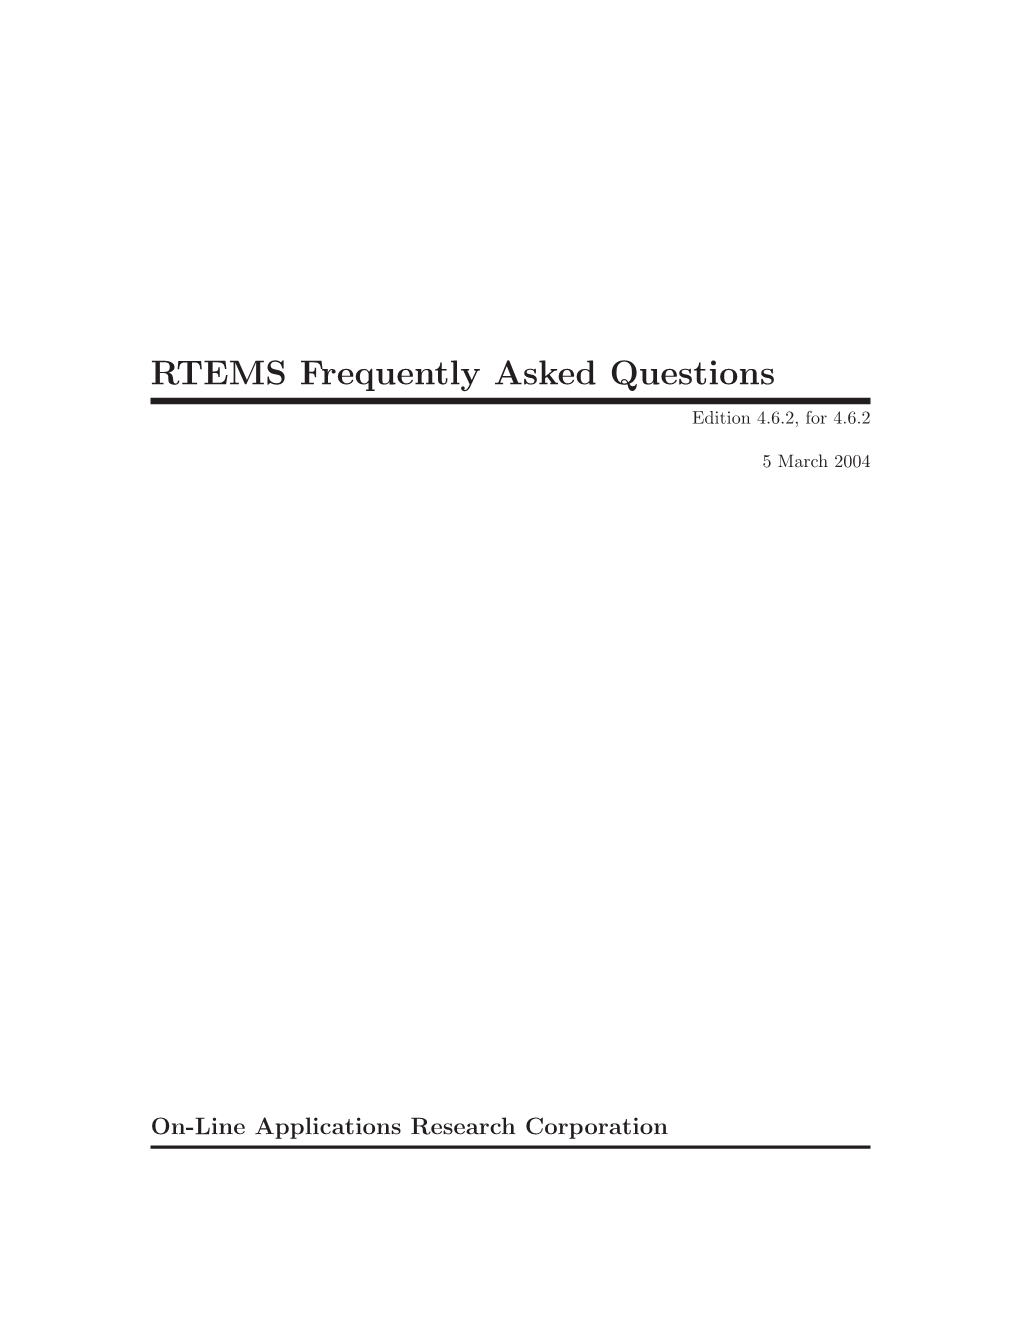 RTEMS Frequently Asked Questions Edition 4.6.2, for 4.6.2